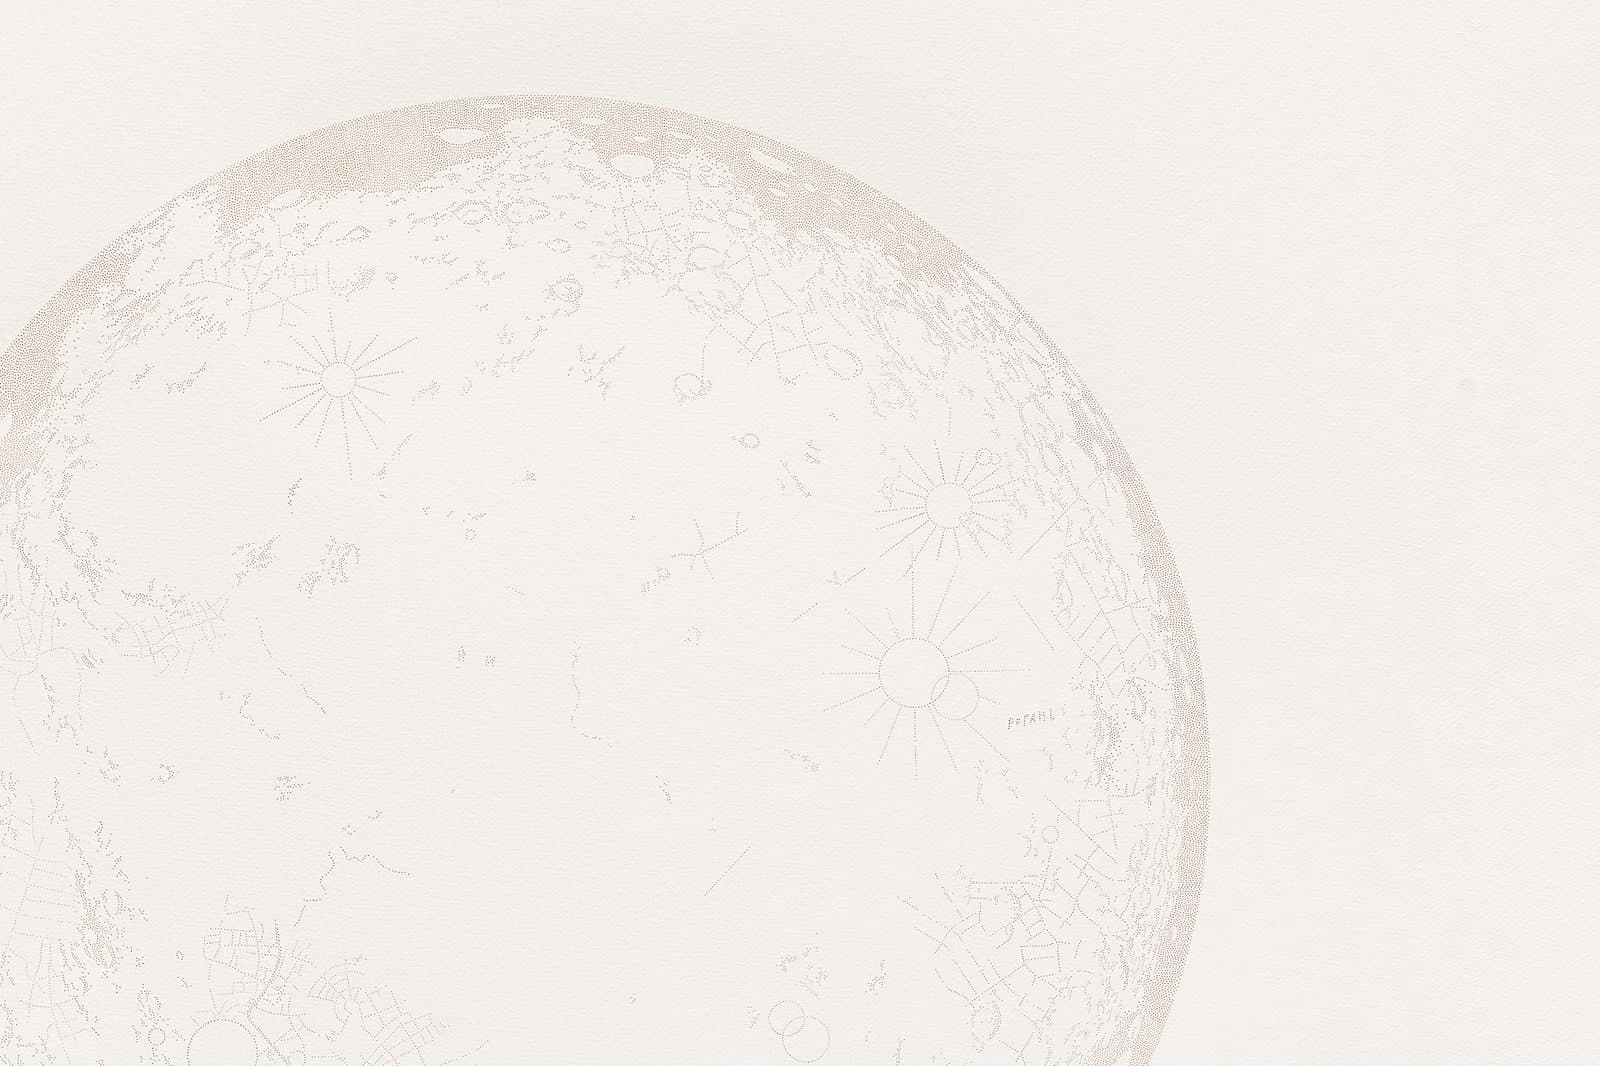 A close up picture of a moon created with pin pricks on paper